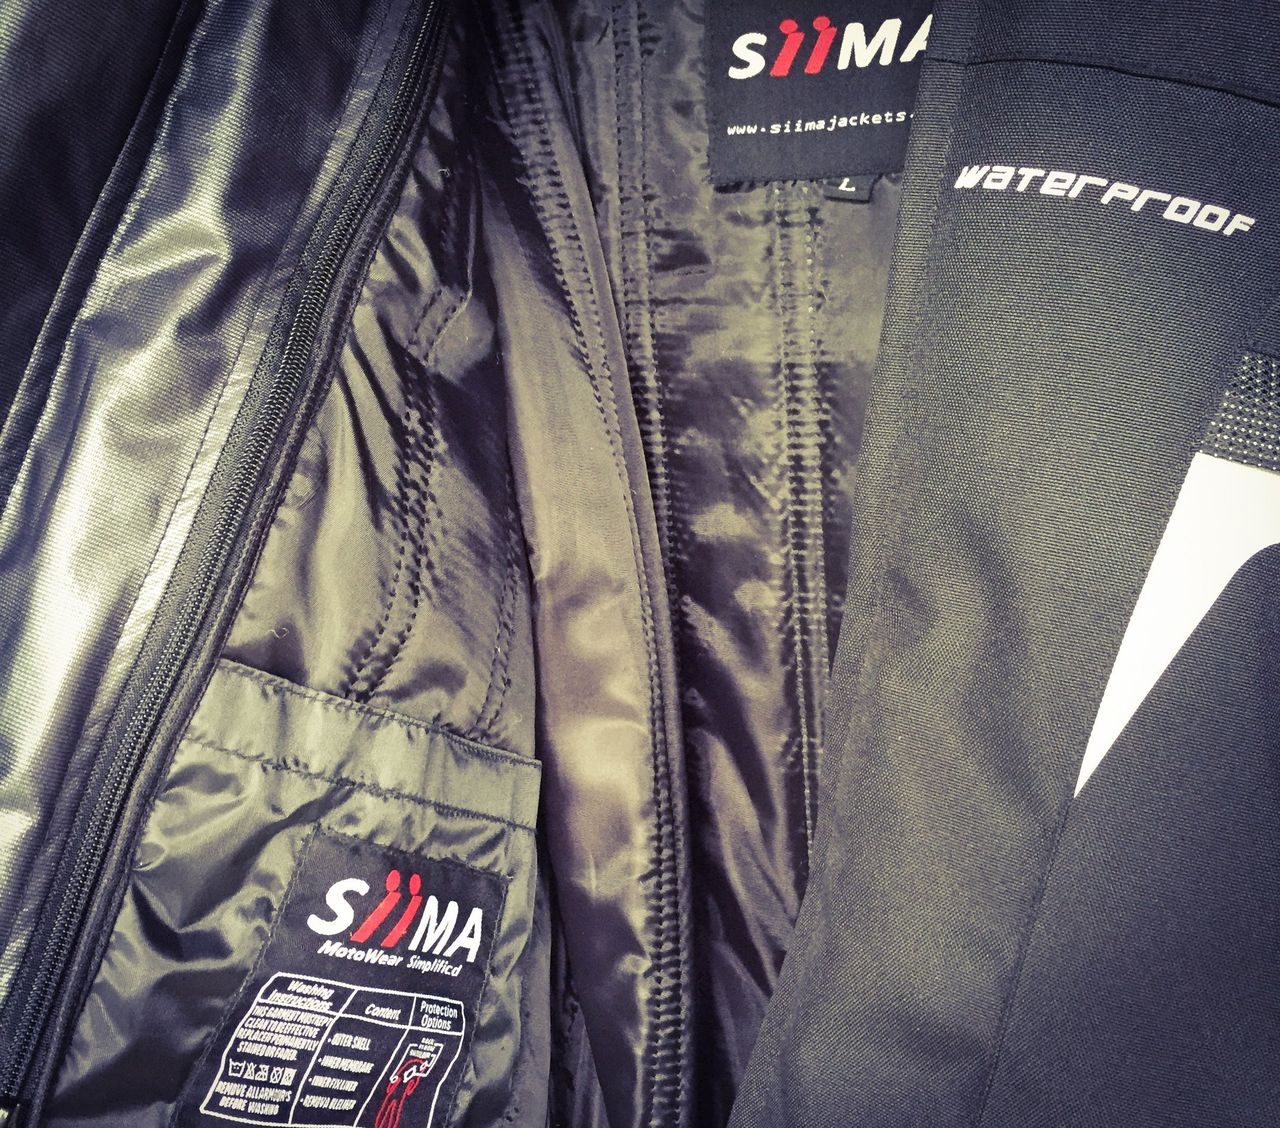 Siima SV3 Leo - Thermal layer keeps you warm even in winter conditions.